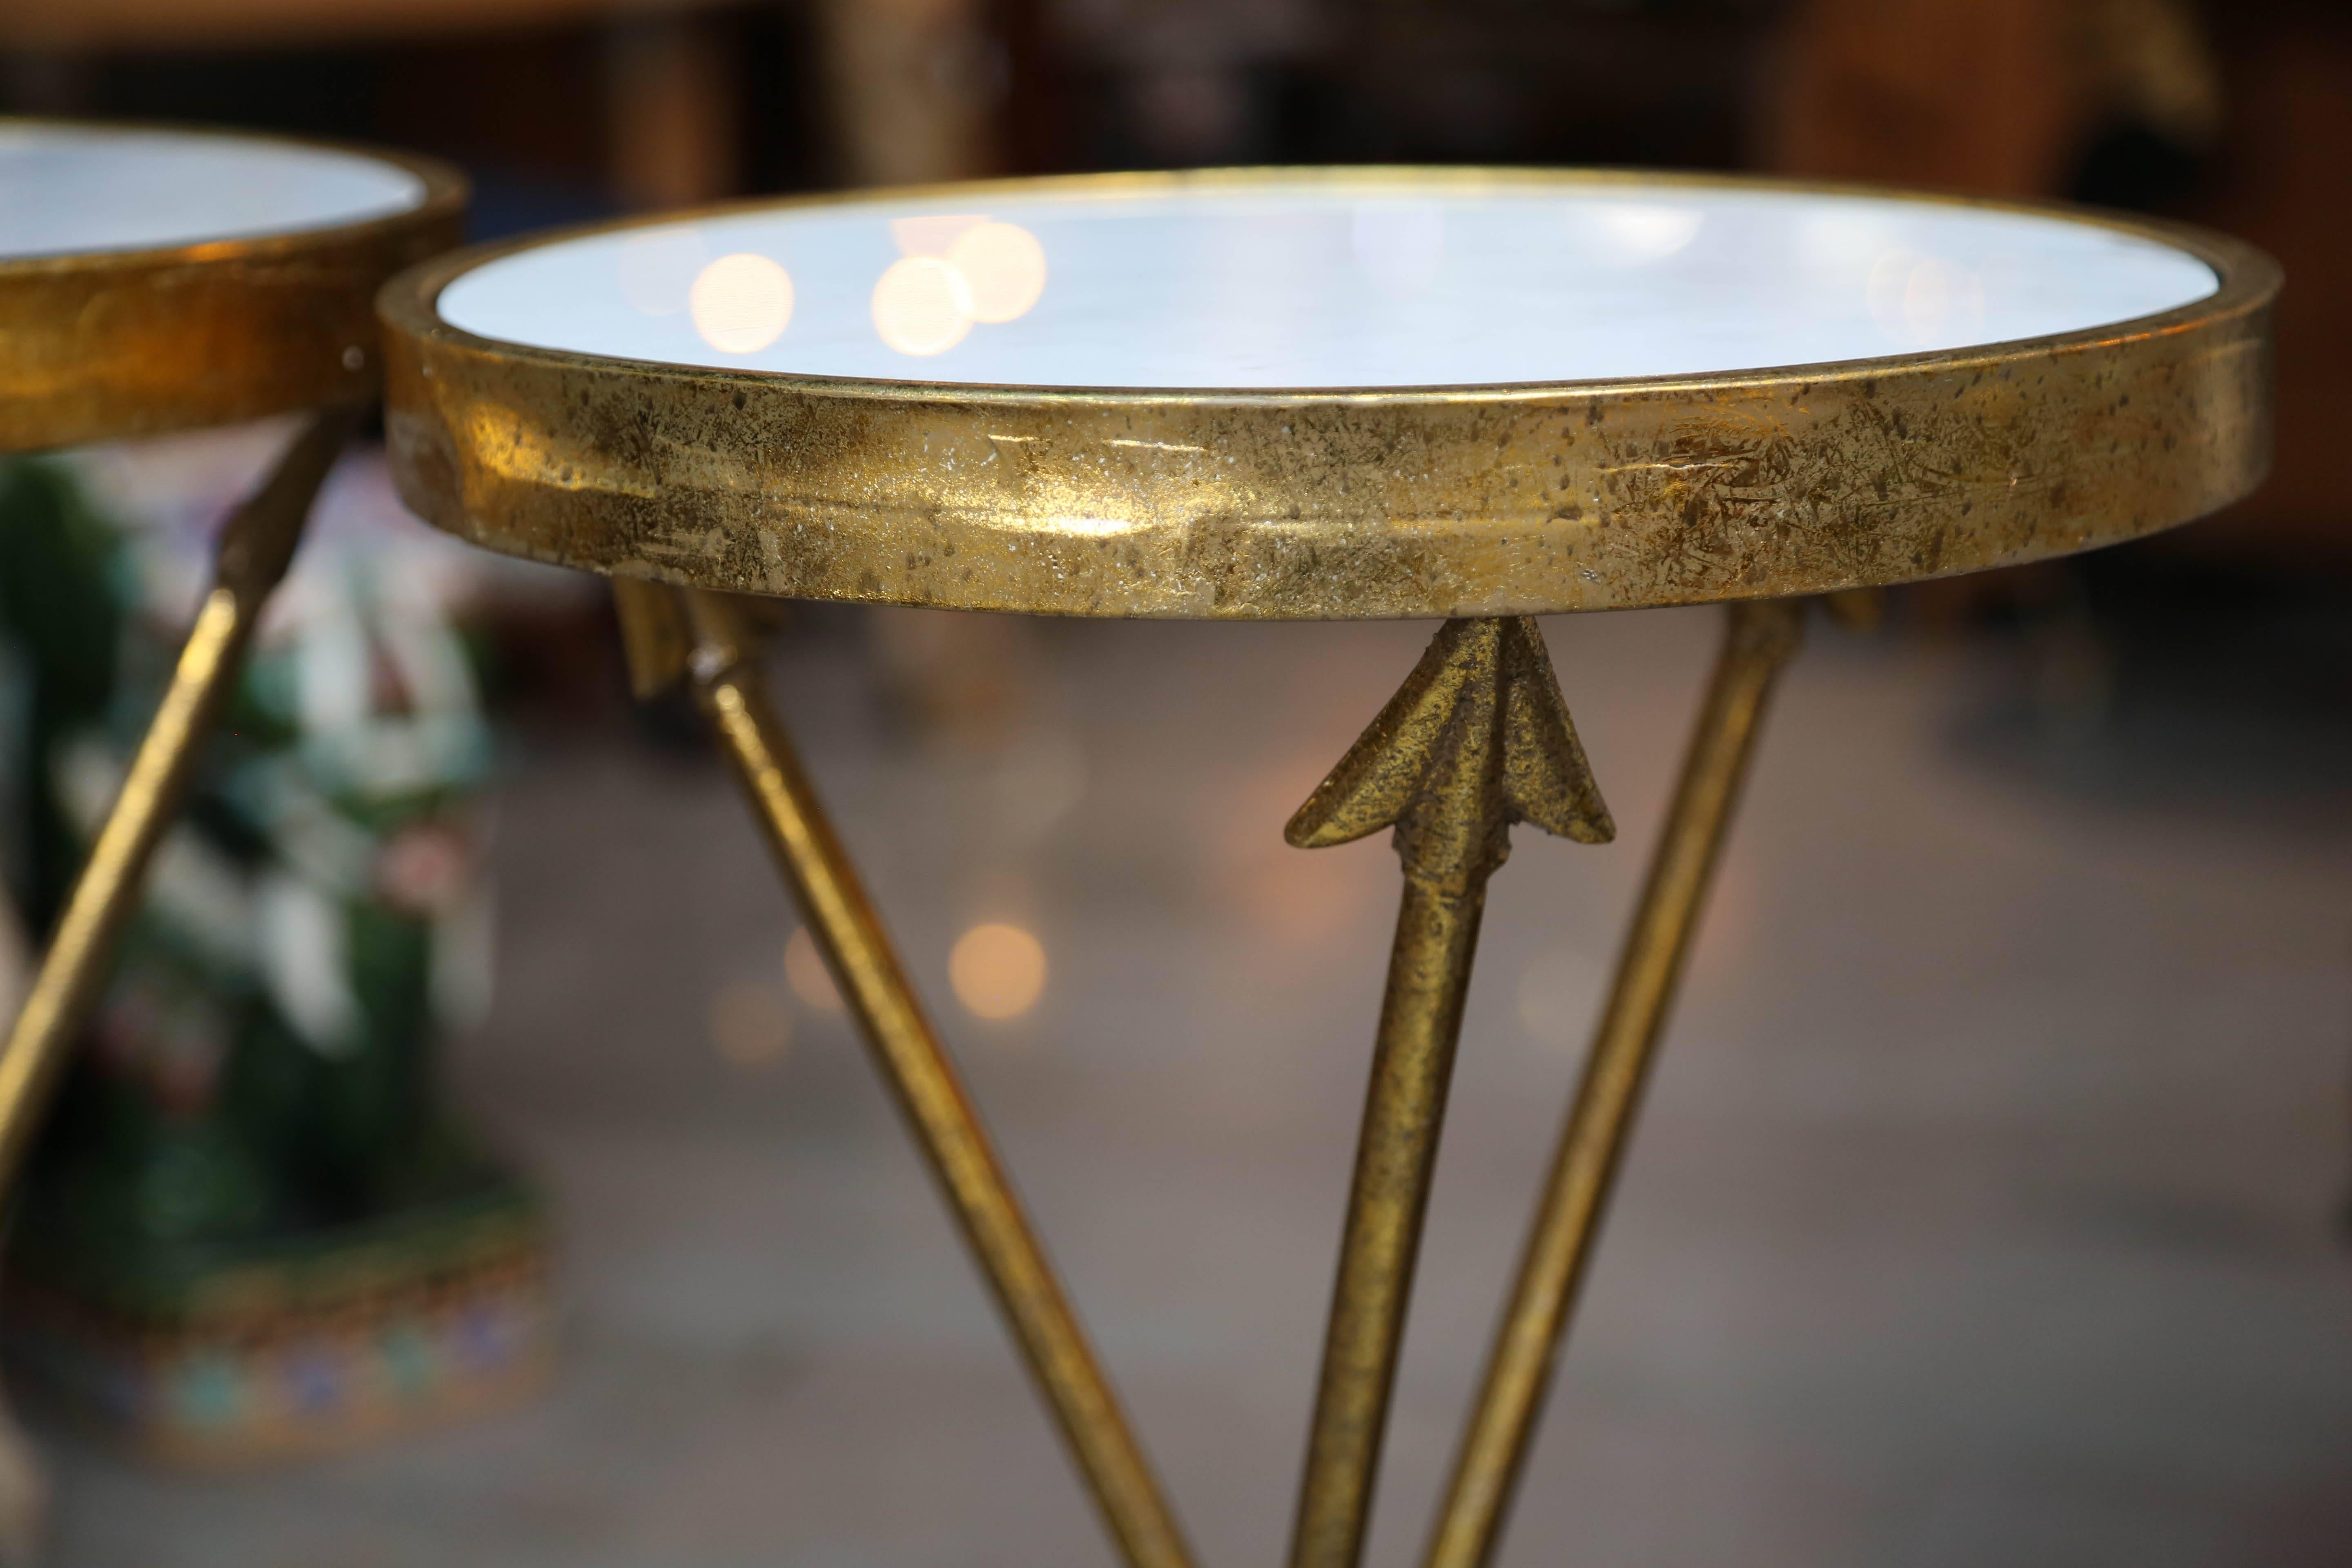 A fanciful pair of gilt appointed stands with tripod bases of arrows. The tables are inset with white Italian marble [14